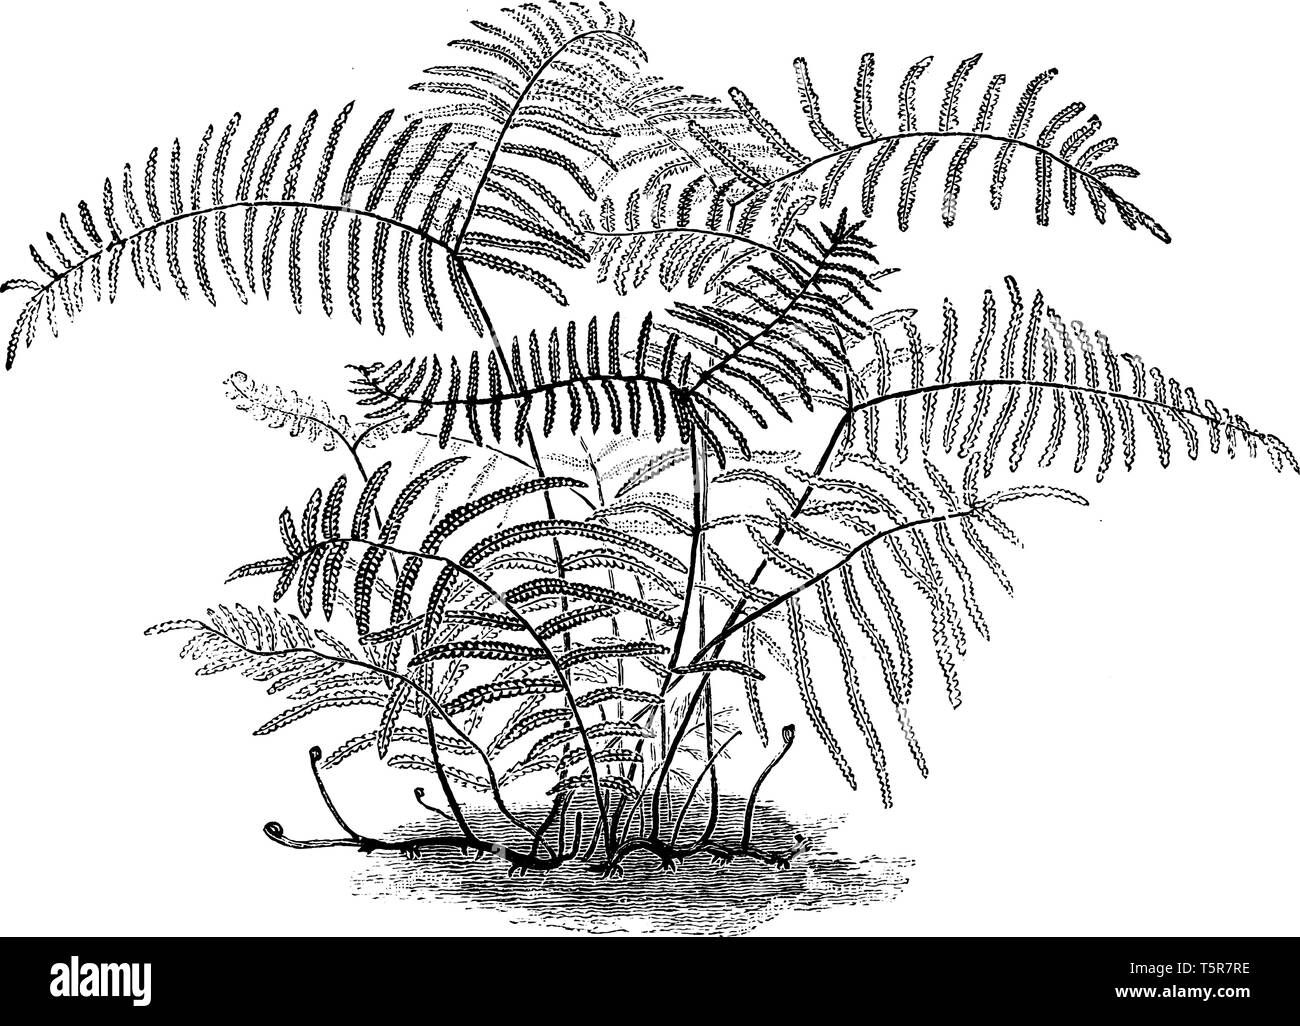 This is image of Gleichenia Circinata Semi-Vestita and it is similar to gleichenia circinata, vintage line drawing or engraving illustration. Stock Vector